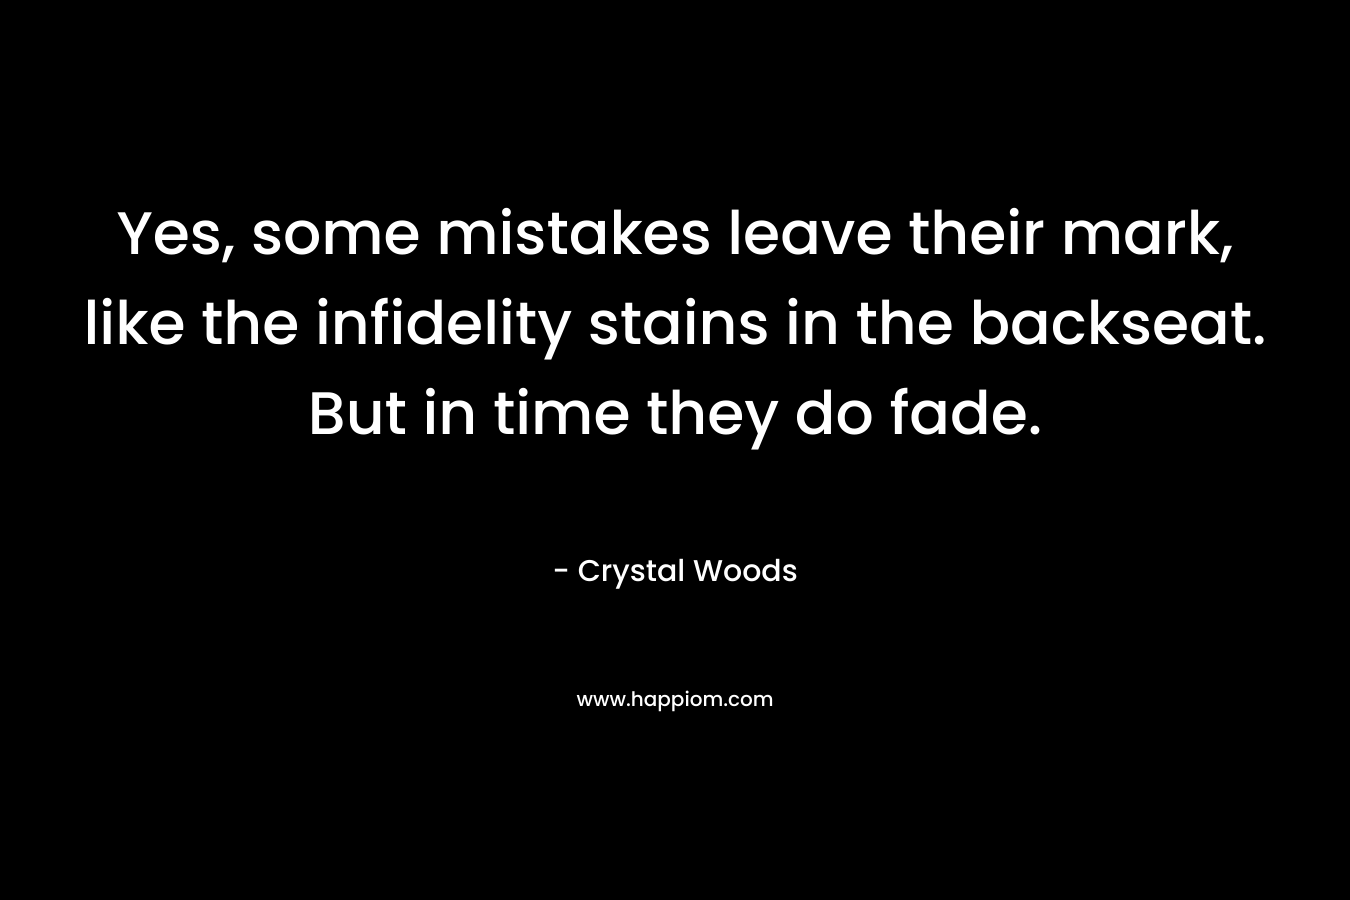 Yes, some mistakes leave their mark, like the infidelity stains in the backseat. But in time they do fade. – Crystal Woods